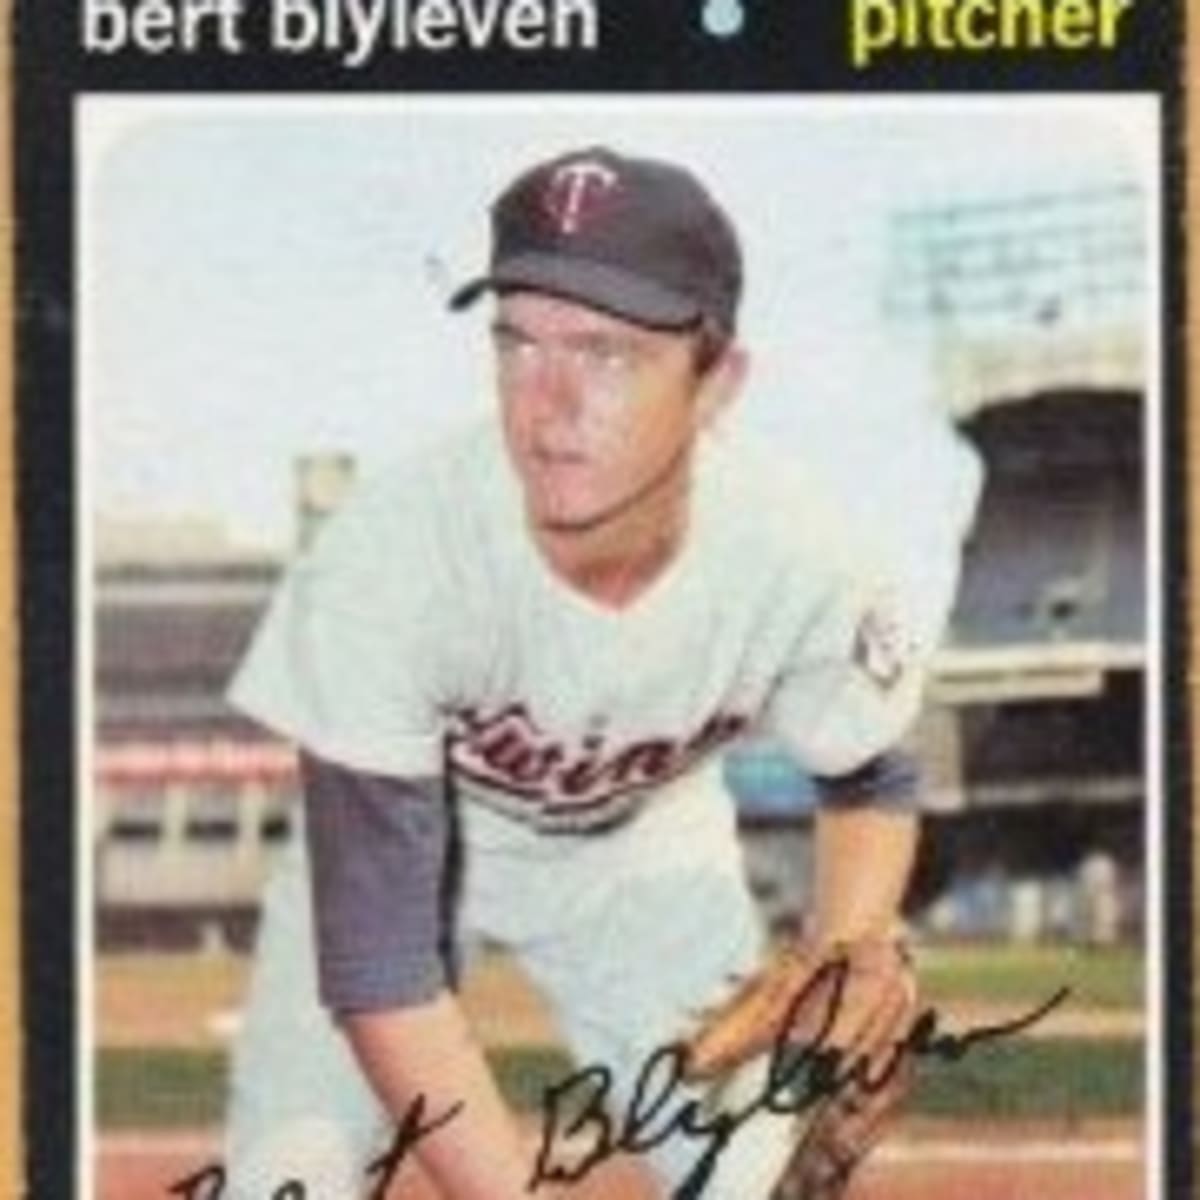 Hall of Fame pitcher Bert Blyleven has an amazing memorabilia collection to  go with his impressive resume - Sports Collectors Digest